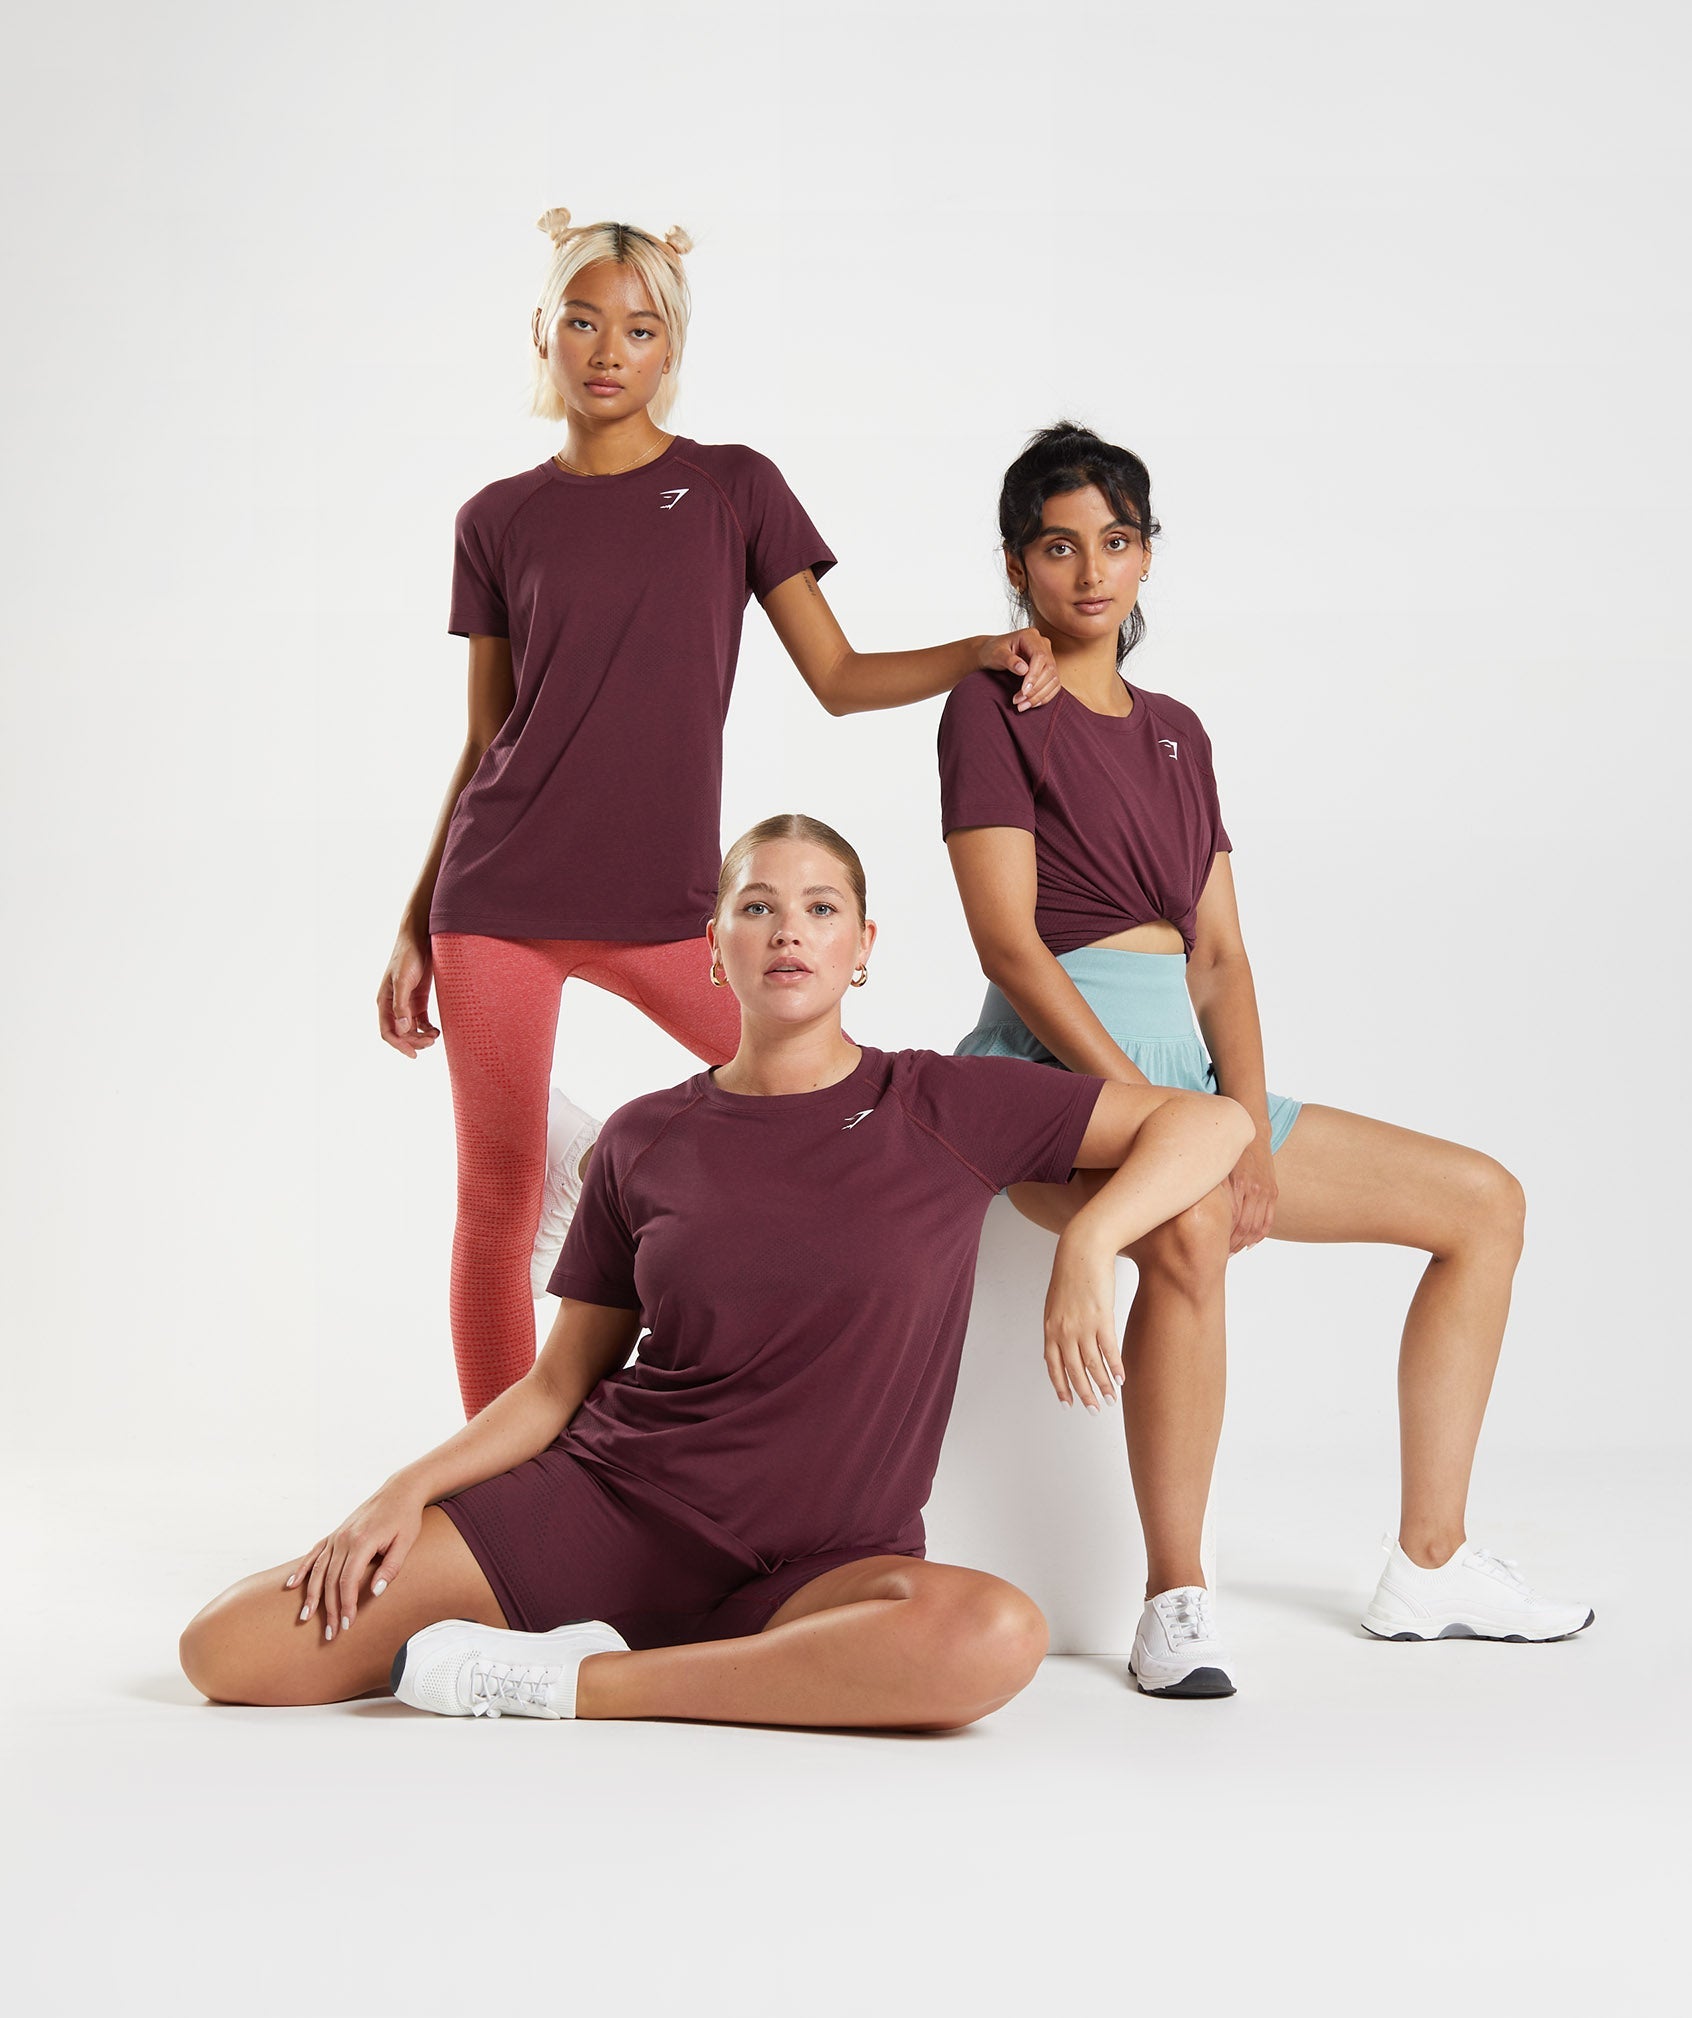 Vital Seamless 2.0 Light T-Shirt in Baked Maroon Marl - view 4